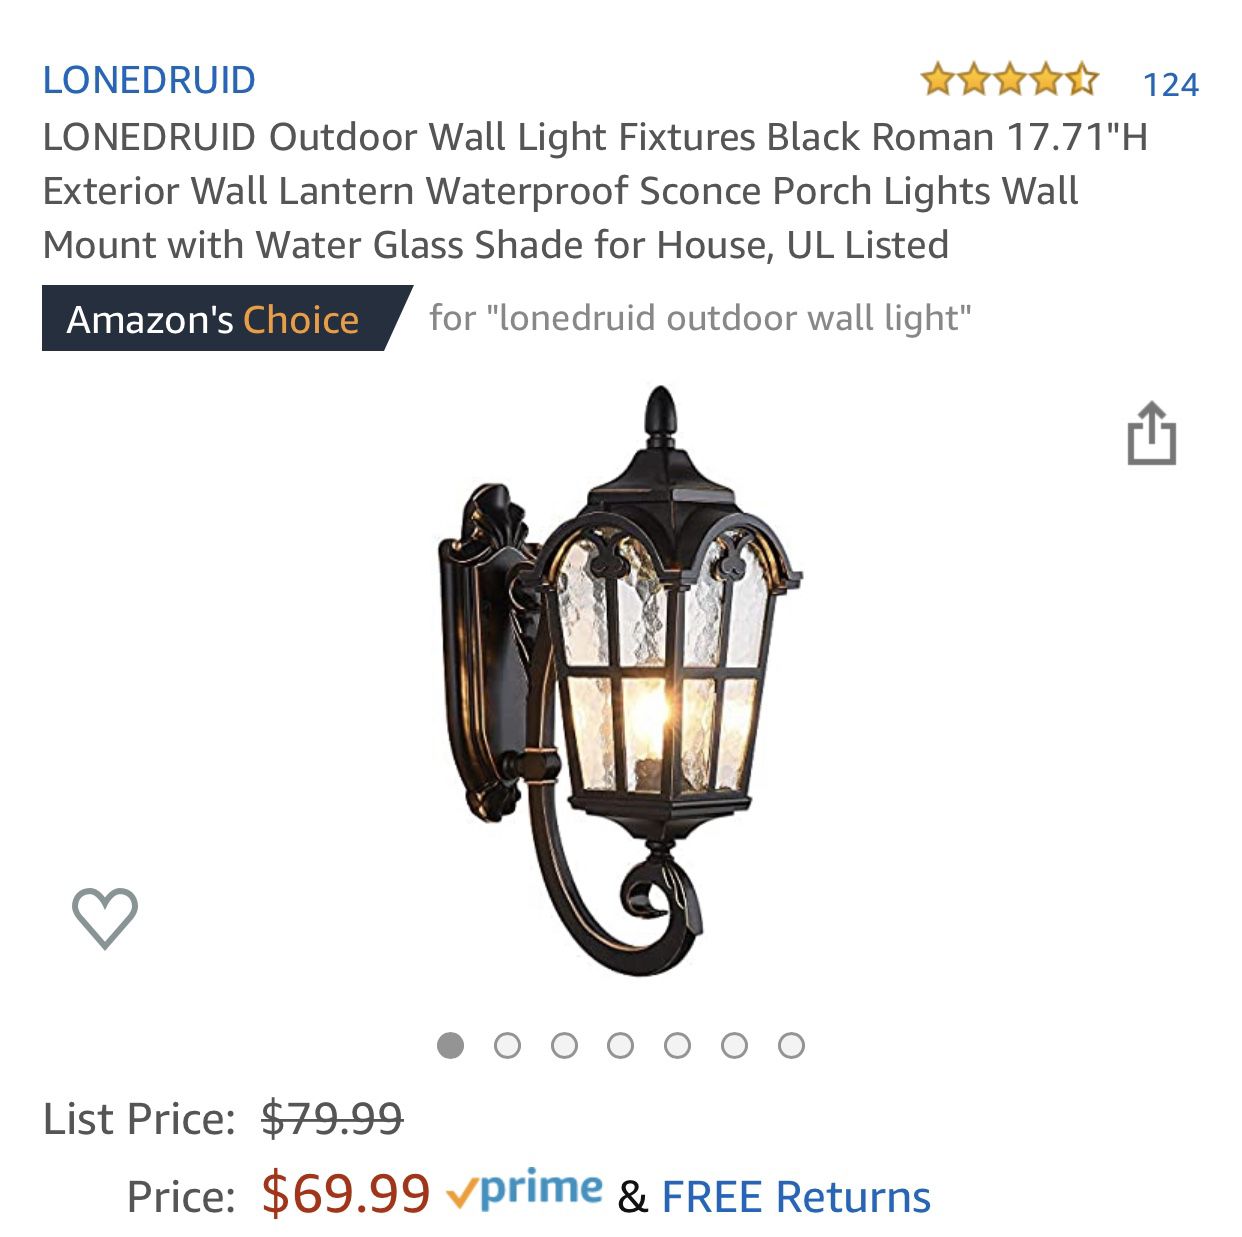 LONEDRUID Outdoor Wall Light Fixtures Black Roman 17.71"H Exterior Wall Lantern Waterproof Sconce Porch Lights Wall Mount with Water Glass Shade for